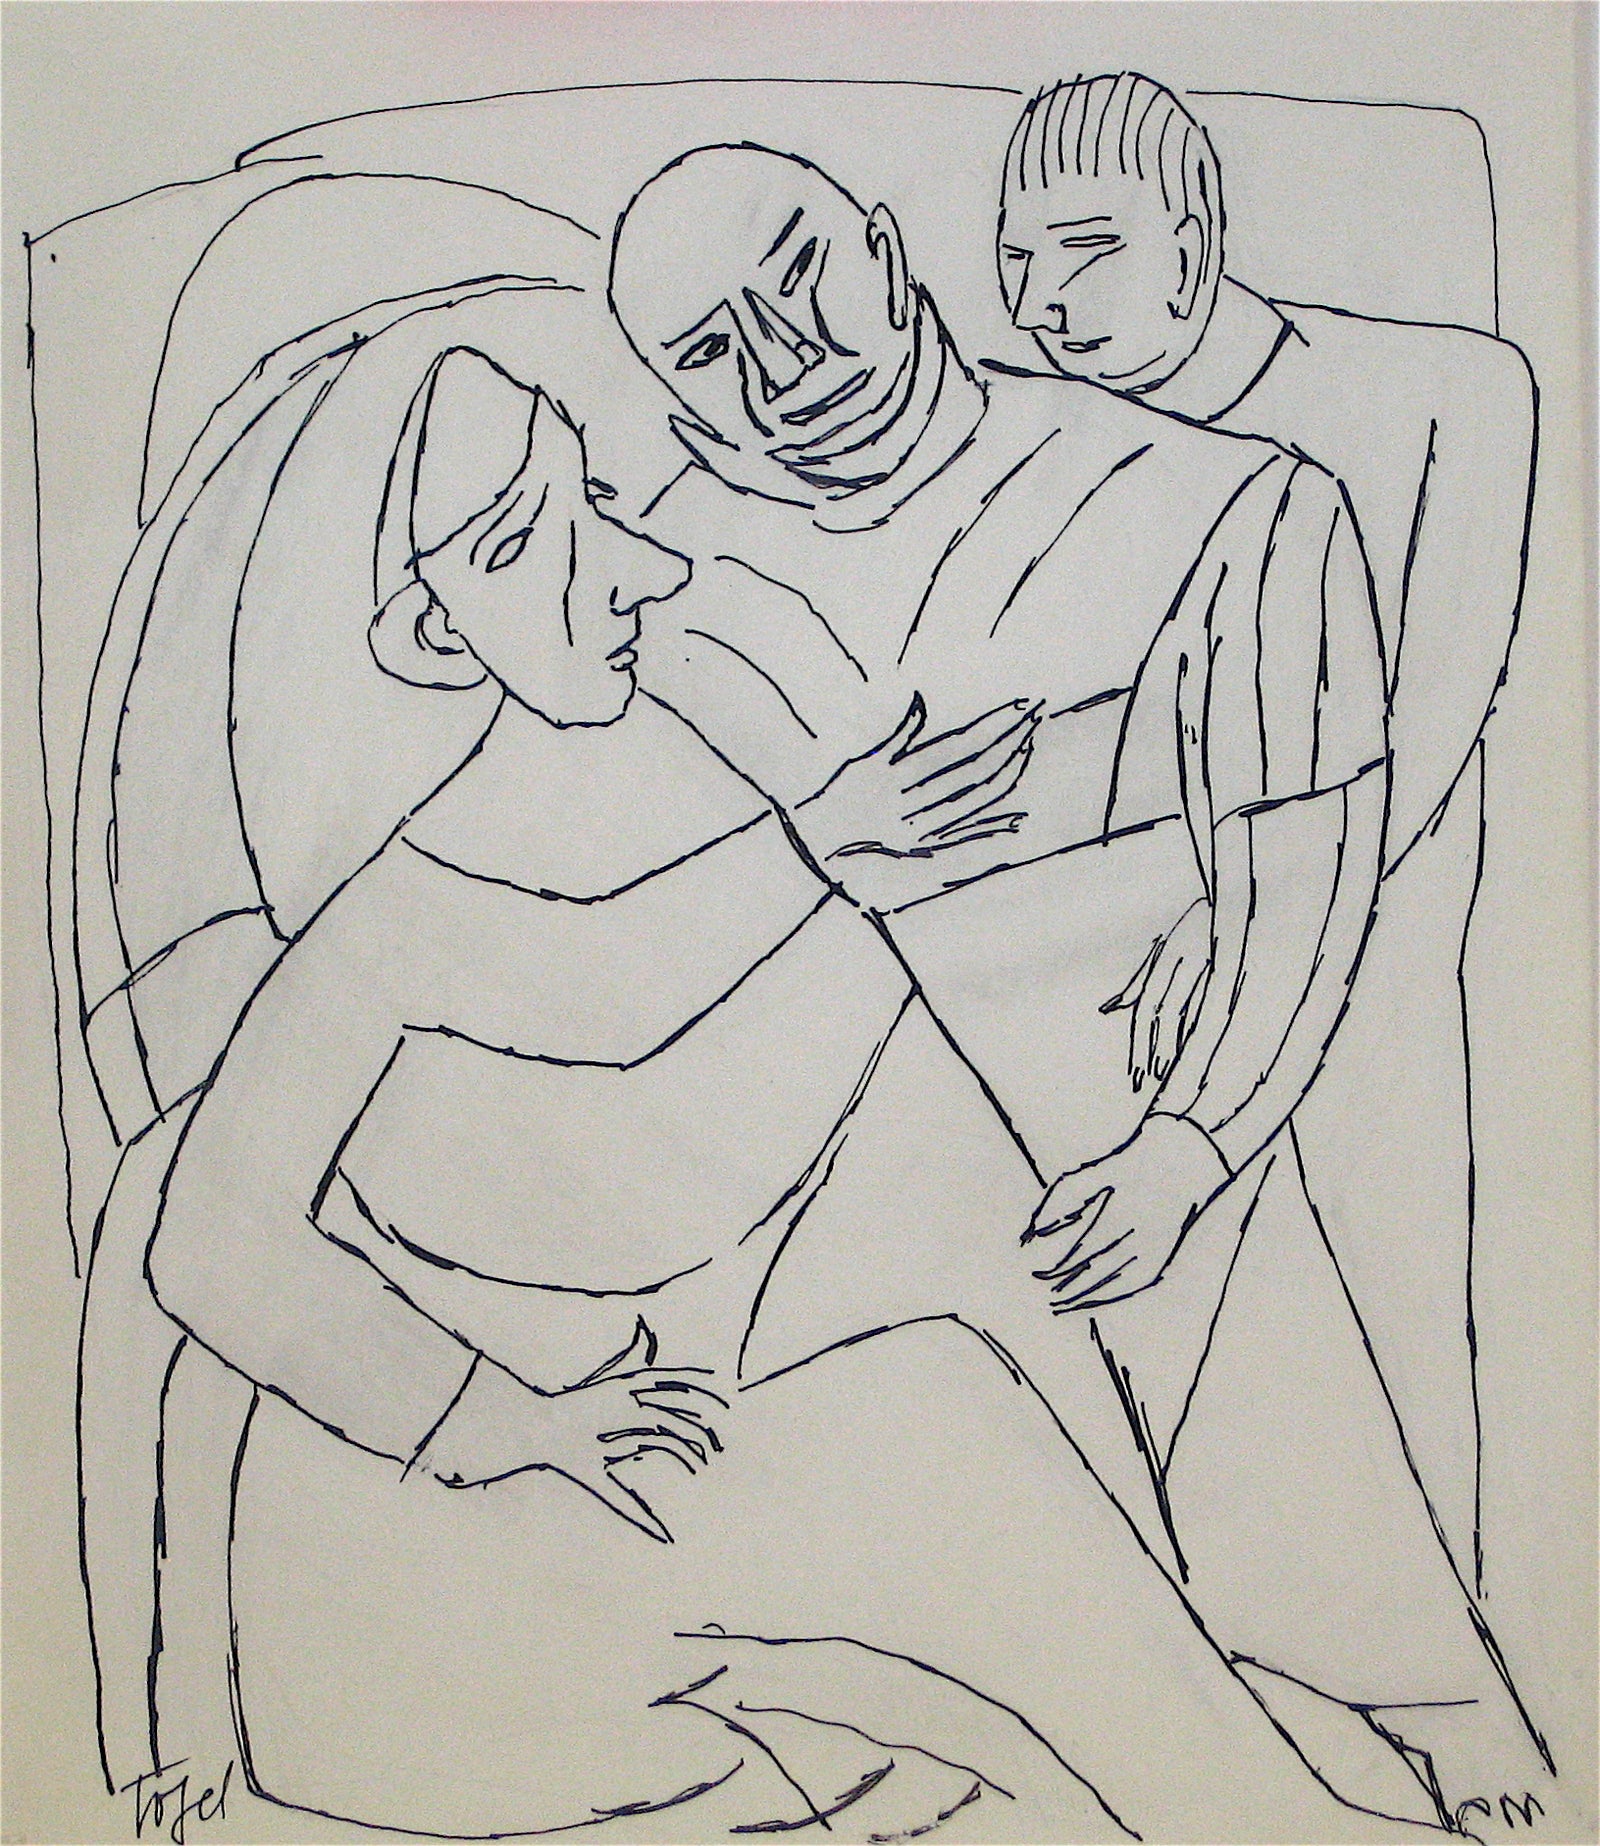 Abstracted Figures with Monk and Nun <br>Early 20th Century Ink on Paper <br><br>#11197